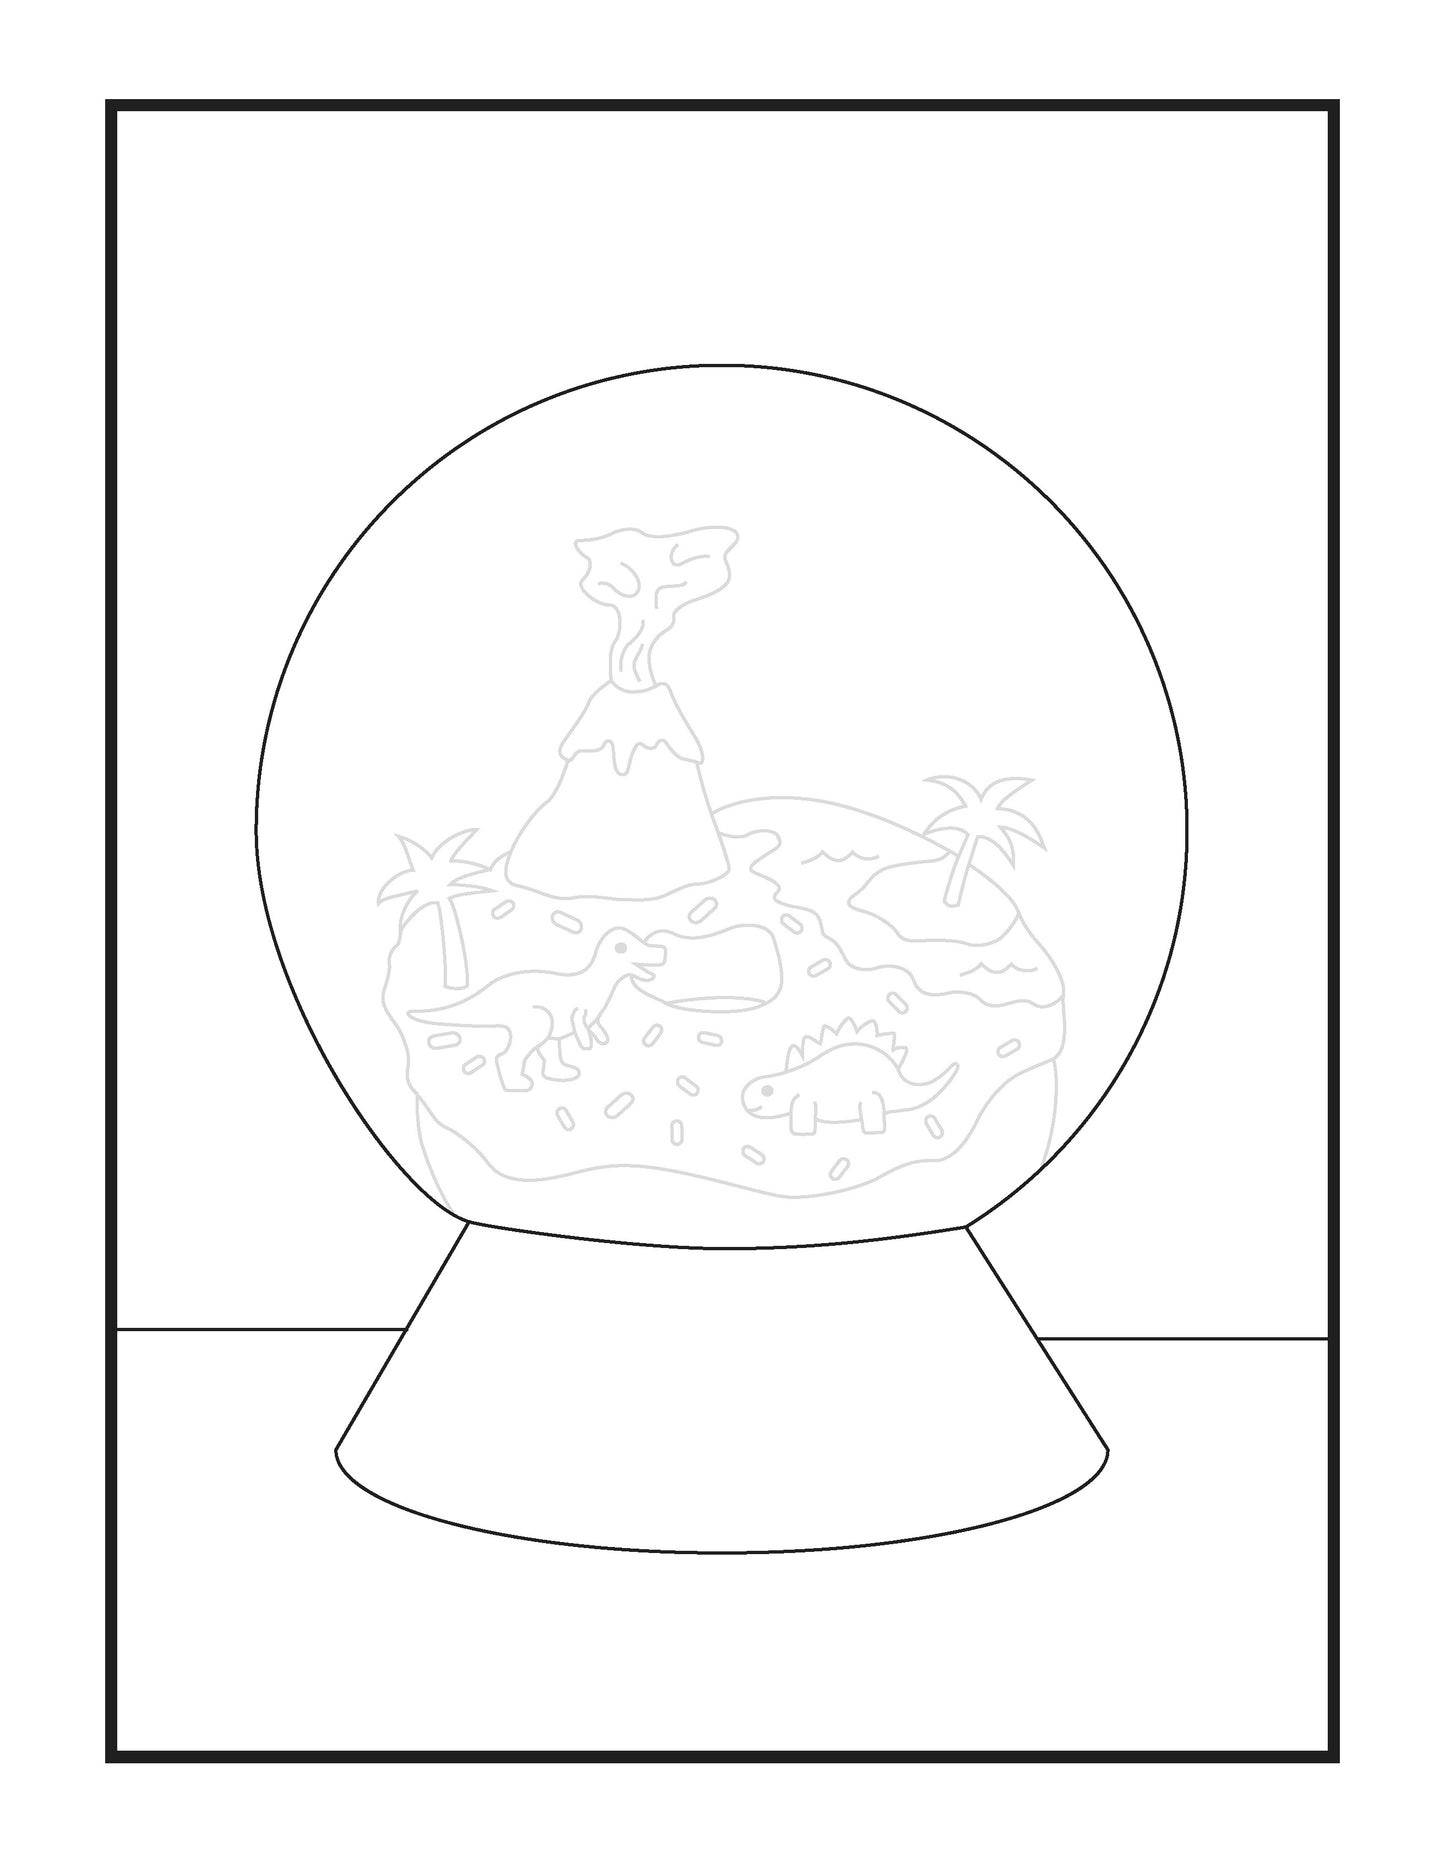 A black and white coloring page depicts a snow globe with a prehistoric landscape. Inside the globe, a volcano erupts while dinosaurs roam around palm trees on rugged terrain. The scene encapsulates a dynamic moment from the Mesozoic era, frozen in time within the confines of the globe. The base of the snow globe is broad and plain, awaiting the addition of colors. This imaginative drawing is designed to both educate and entertain young dinosaur enthusiasts.